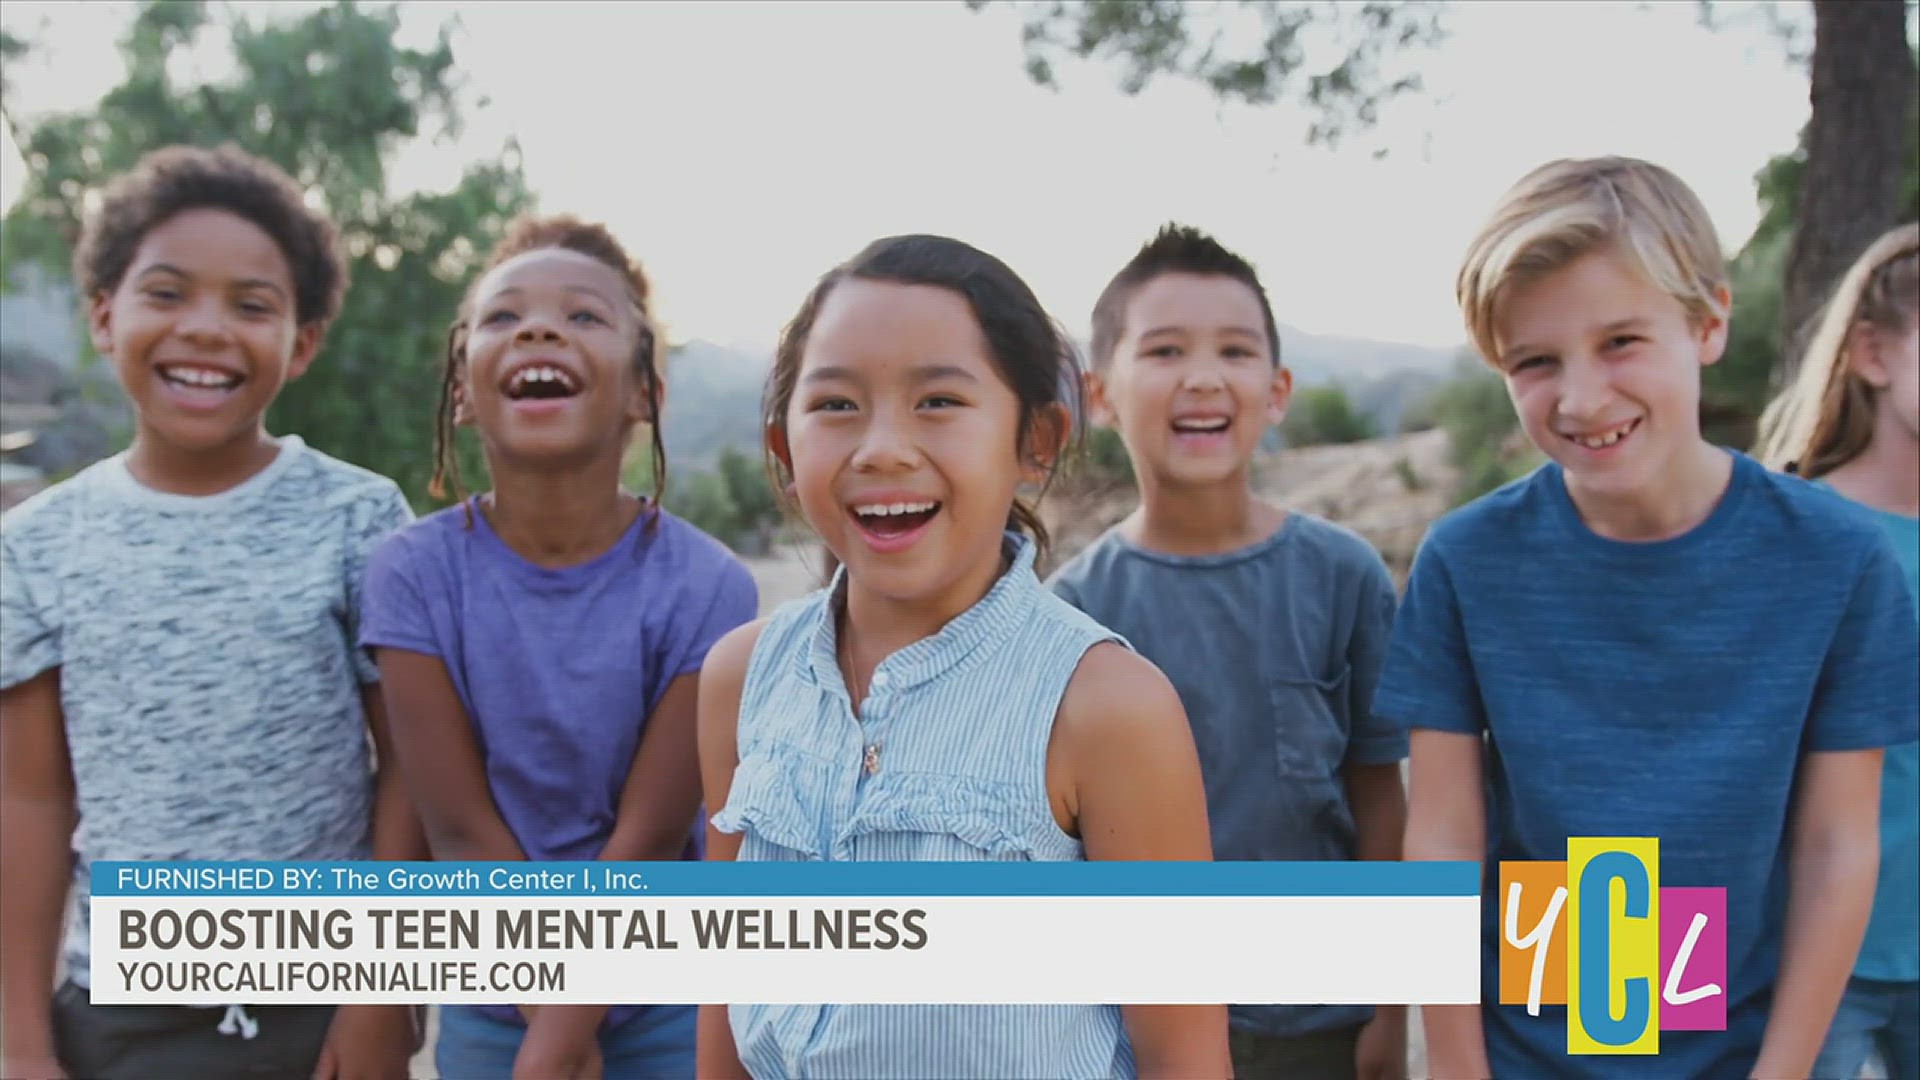 The Youth Mental Wellness Retreat aims to provide youth with support and coping skills to create positive mental health habits.